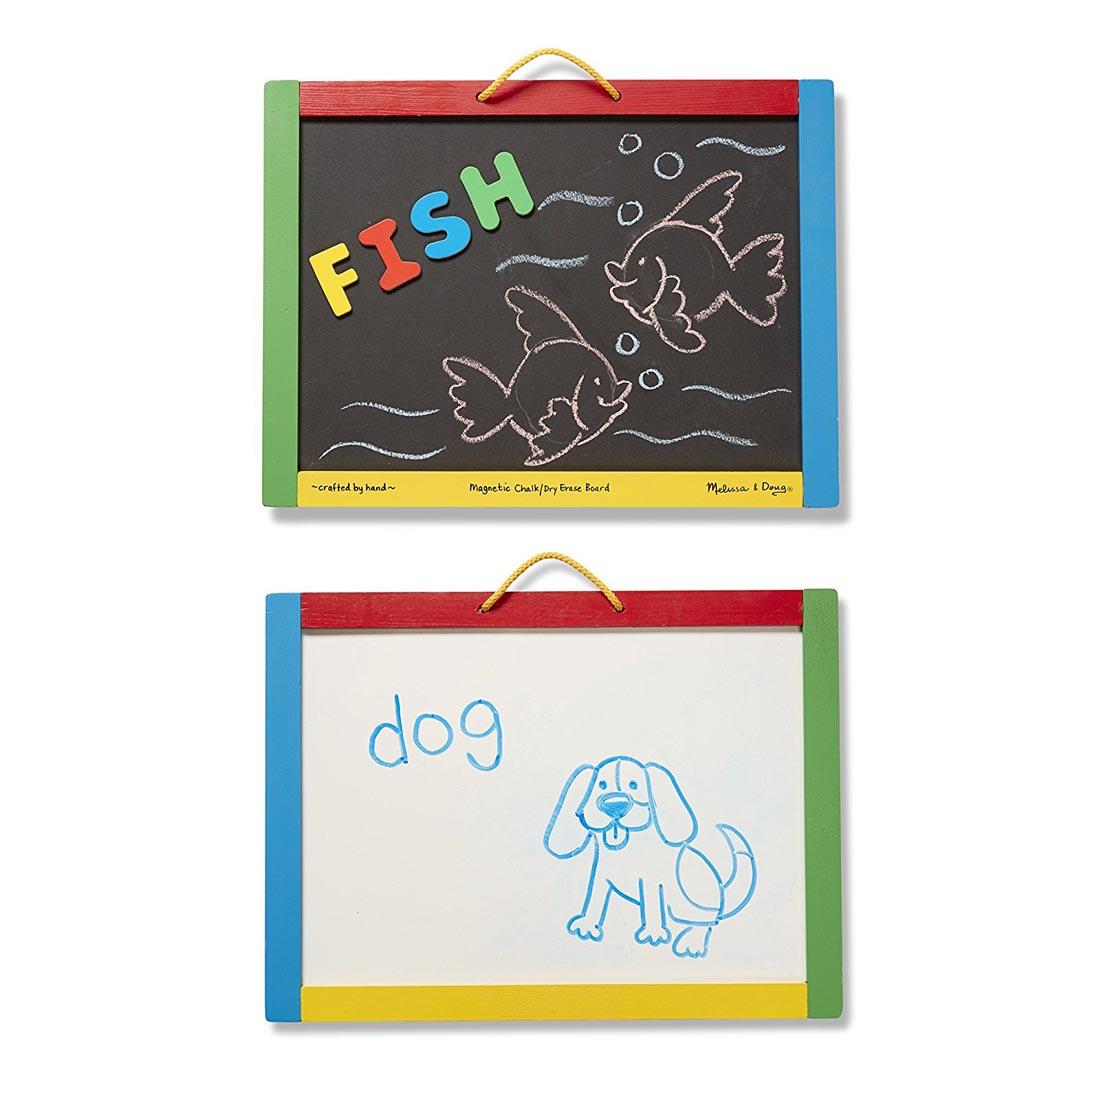 Both sides of the Magnetic Chalkboard - Dry-Erase Board